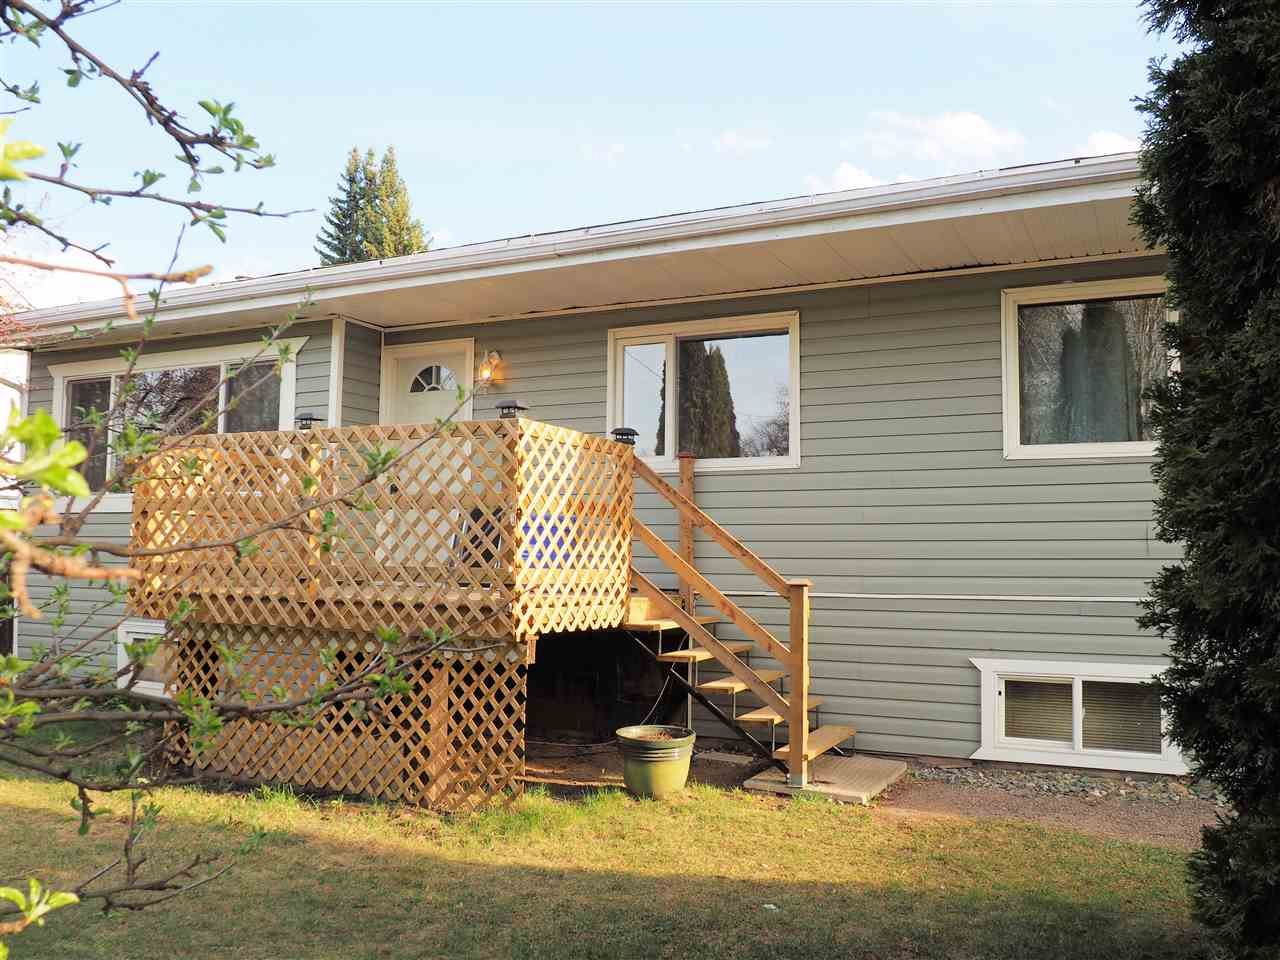 Main Photo: 2715 VANCE Road in Prince George: Peden Hill House for sale (PG City West (Zone 71))  : MLS®# R2102718